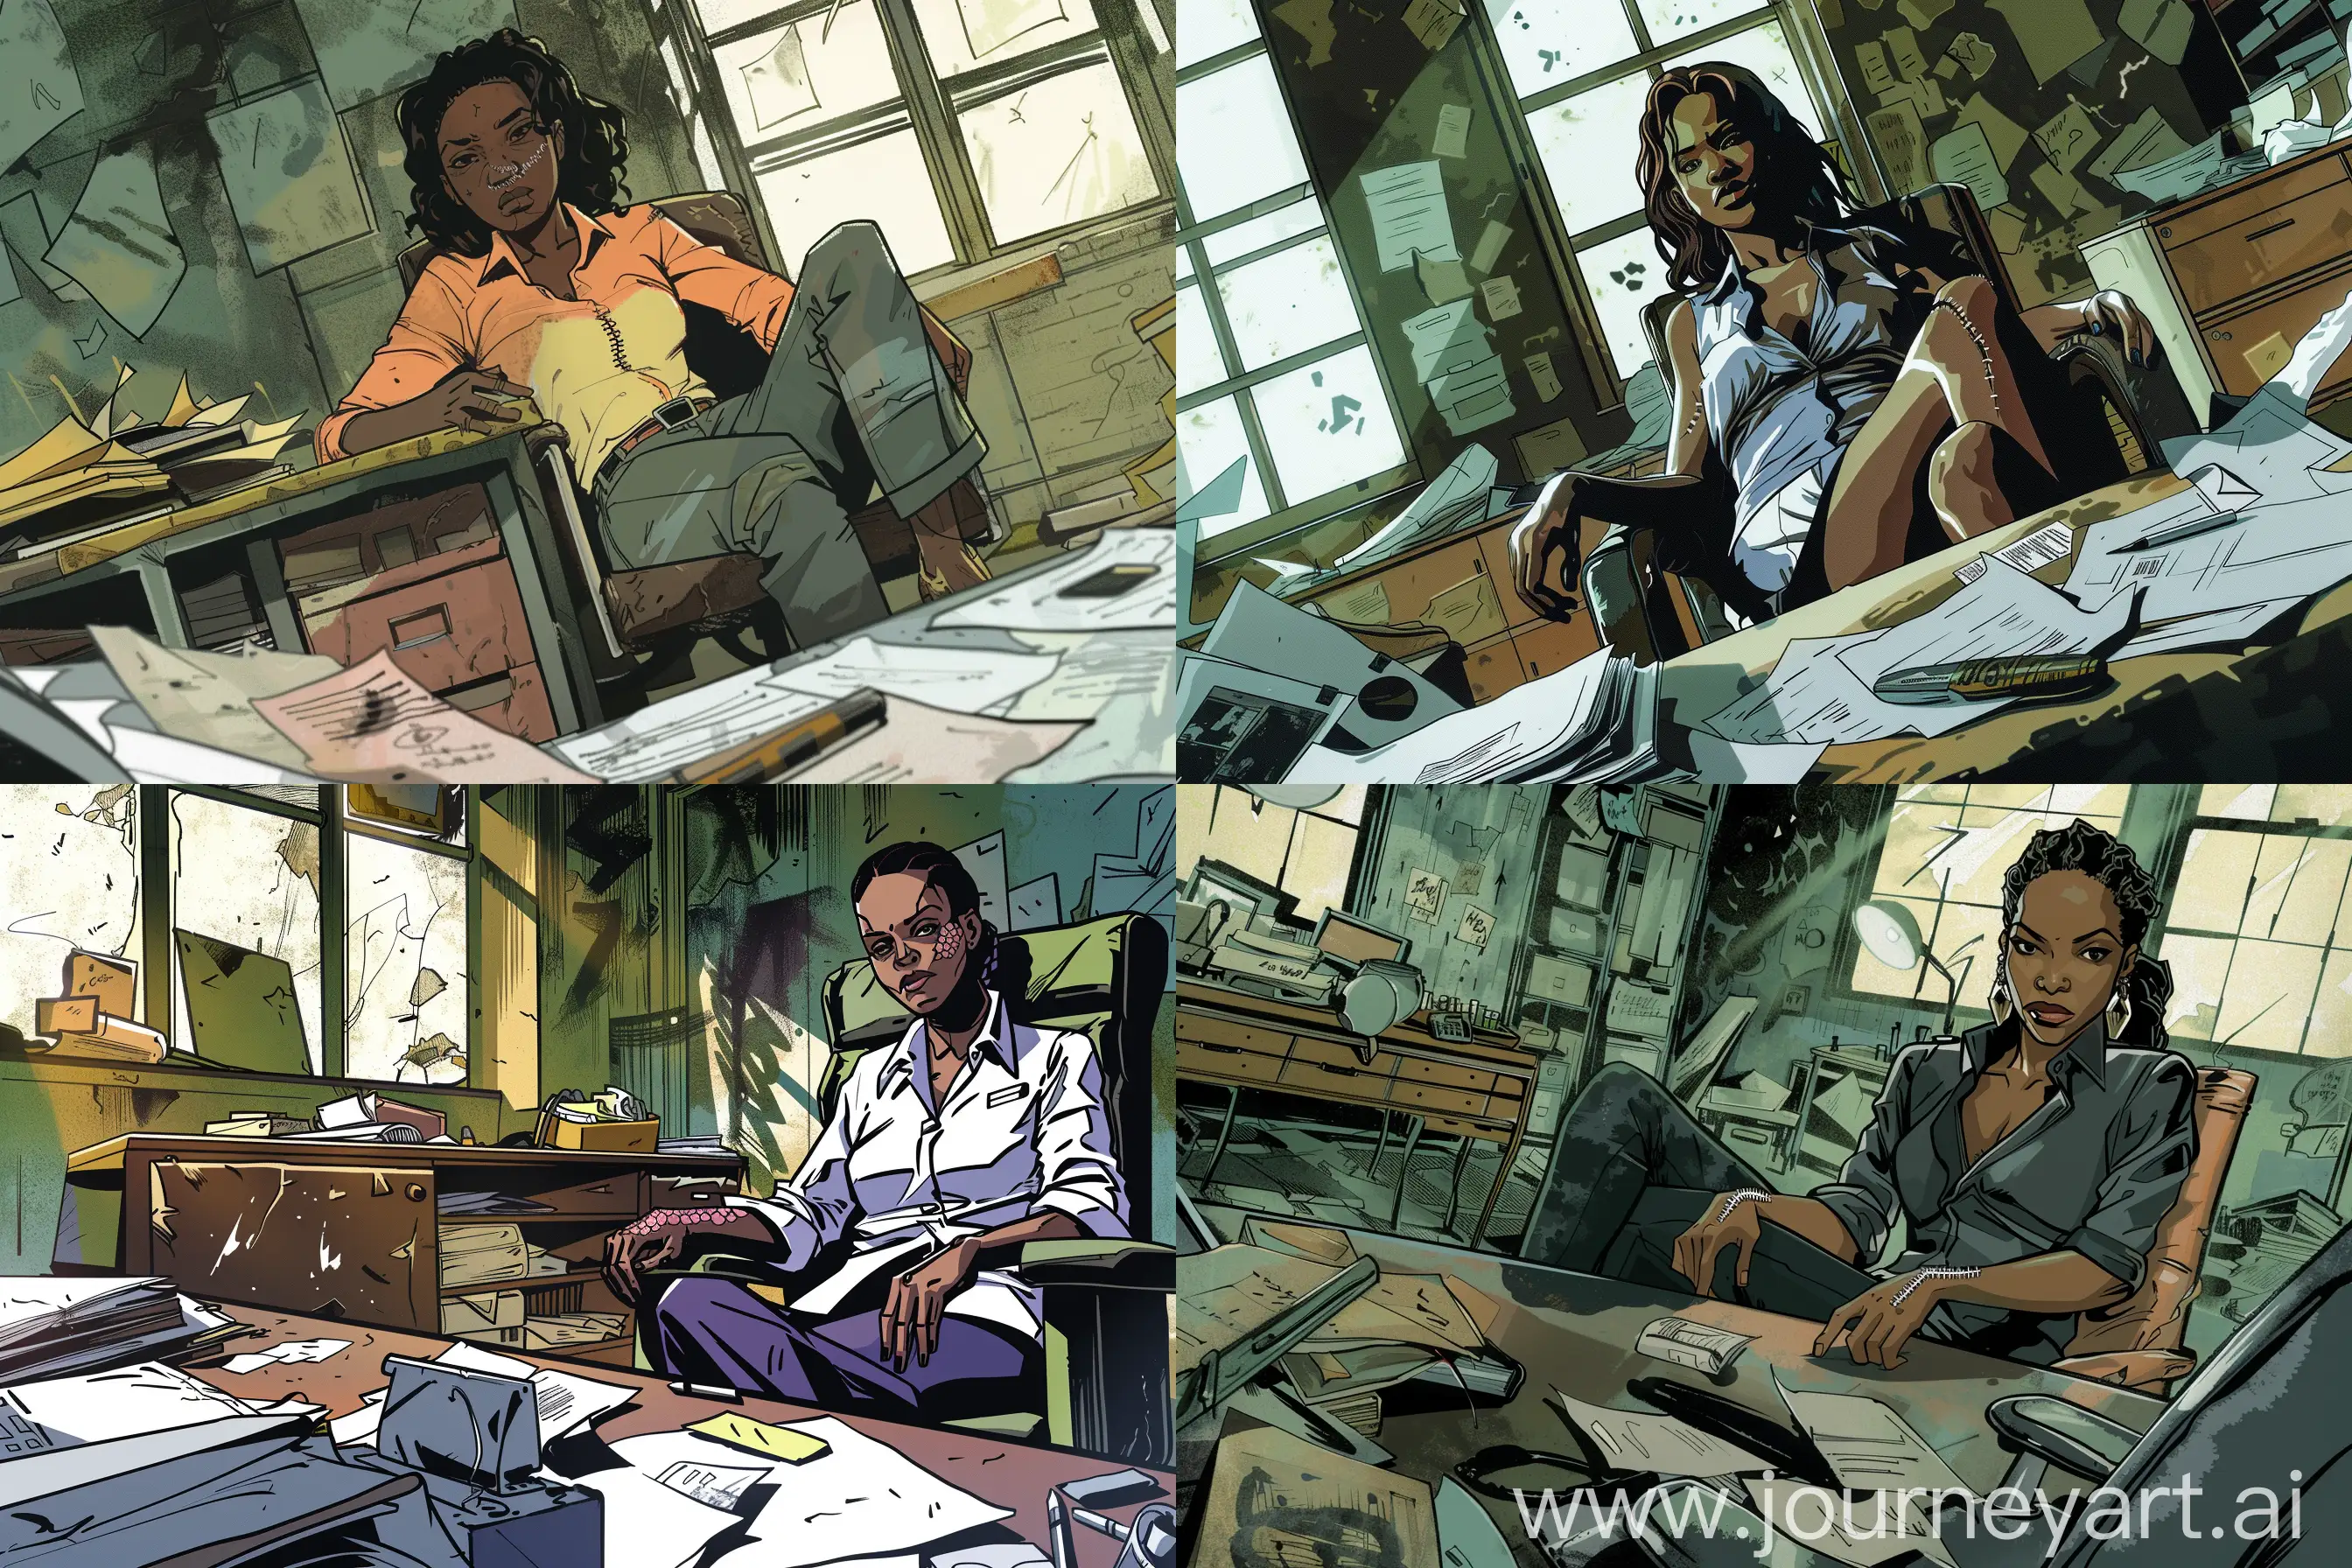 A Black businesswoman with a stitched scar, in a rundown office, sitting in a chair. In the foreground, a table with various papers and assorted objects, comic book style, graphic novel --ar 3:2.